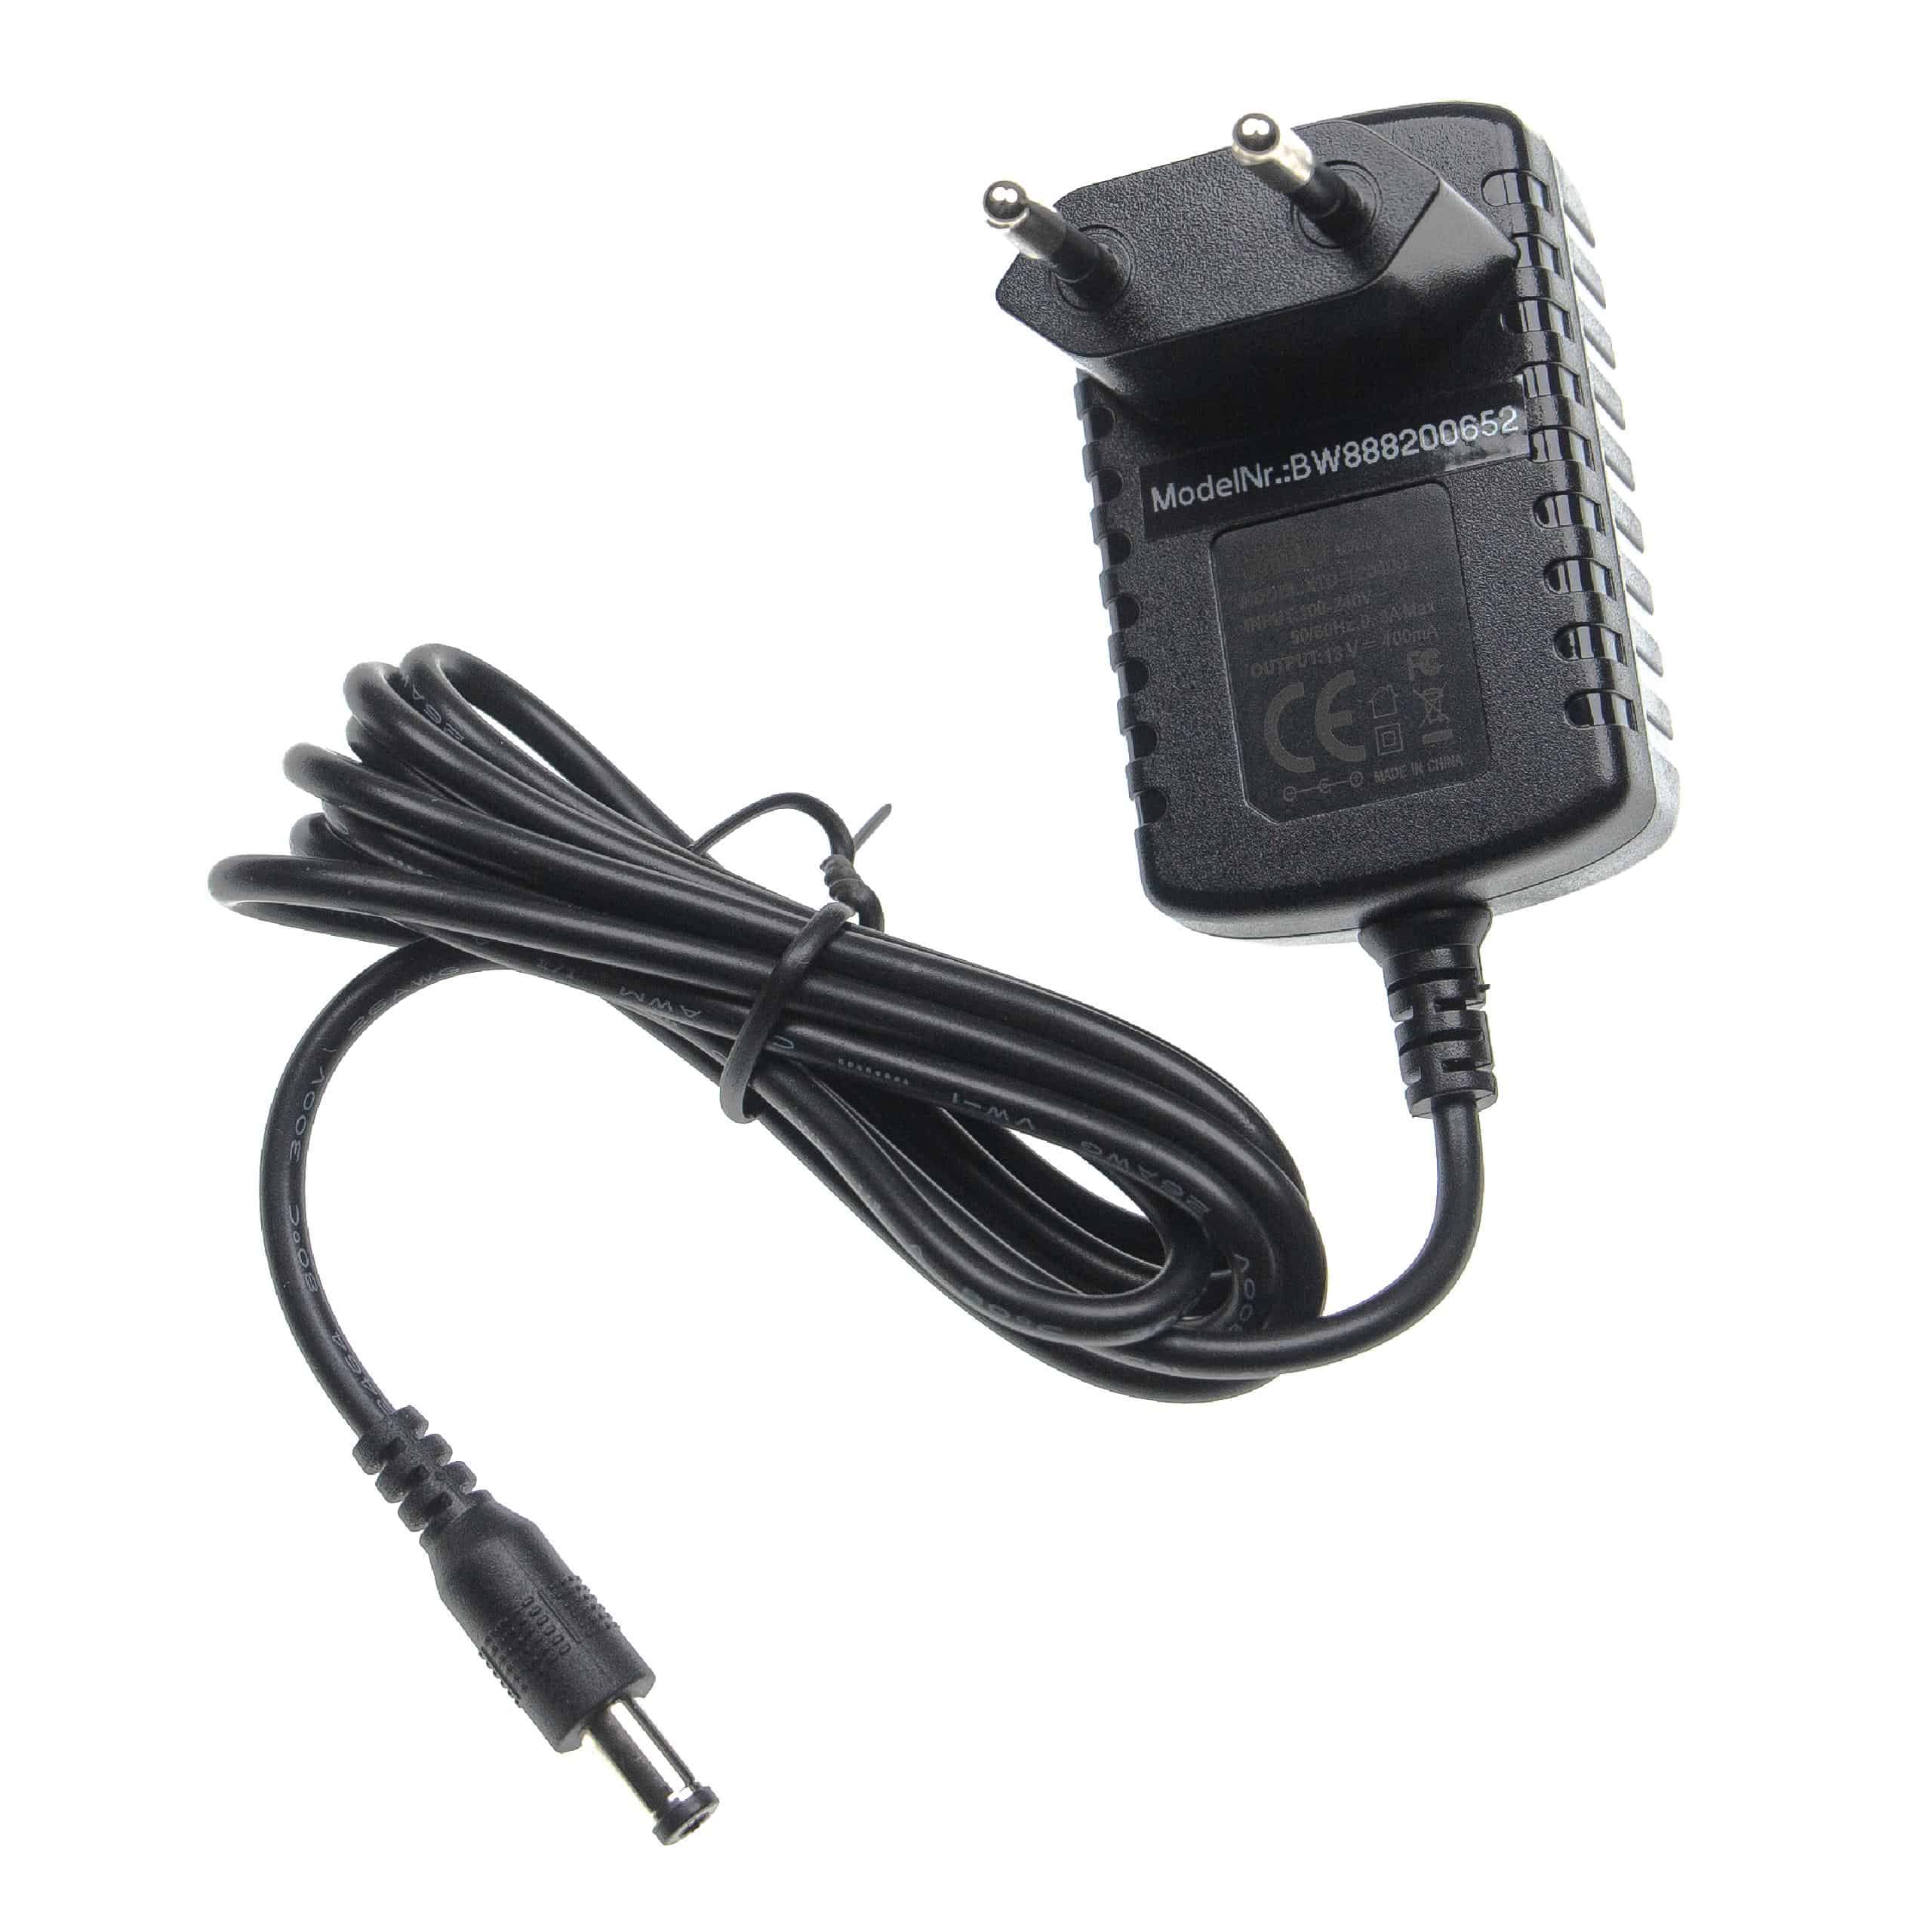 Mains Power Adapter replaces Philips SSW-2082EU for Philips Epilator